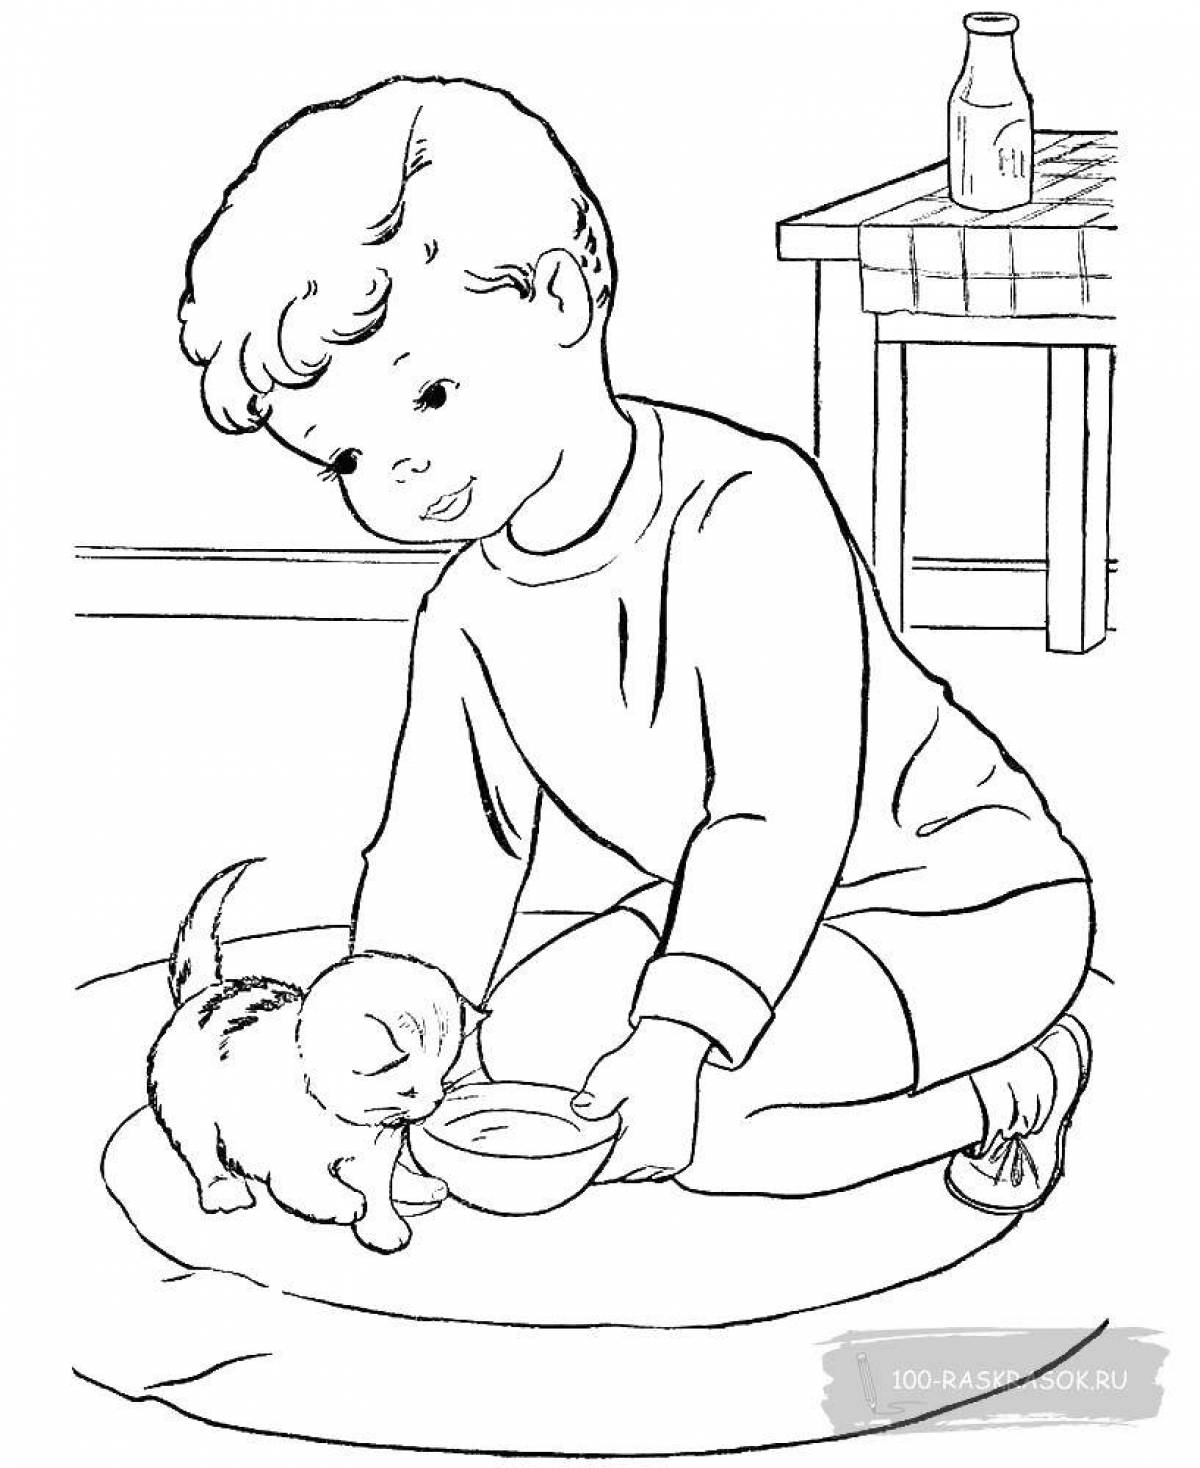 Inspiring good deed coloring page